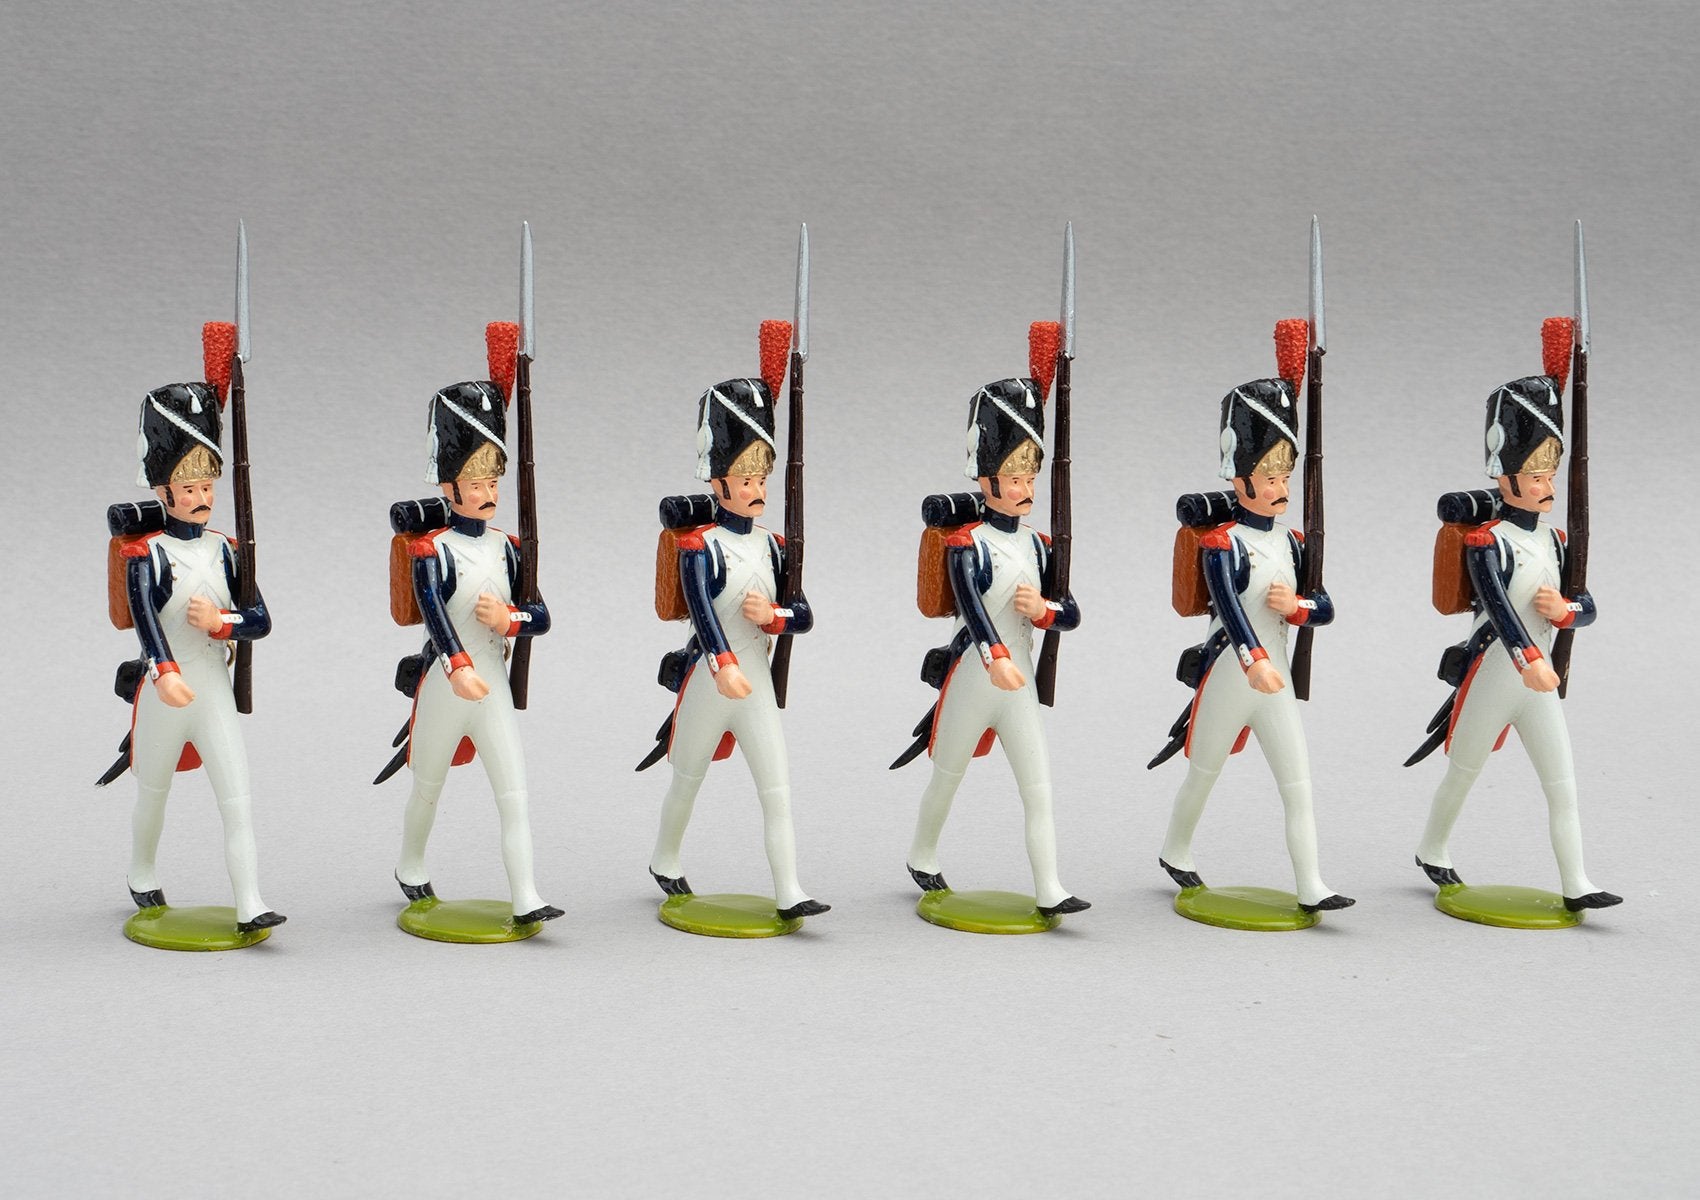 Set 107a Grenadiers à Pied | French Infantry | Napoleonic Wars | Six men marching | Waterloo | © Imperial Productions | Sculpt by David Cowe